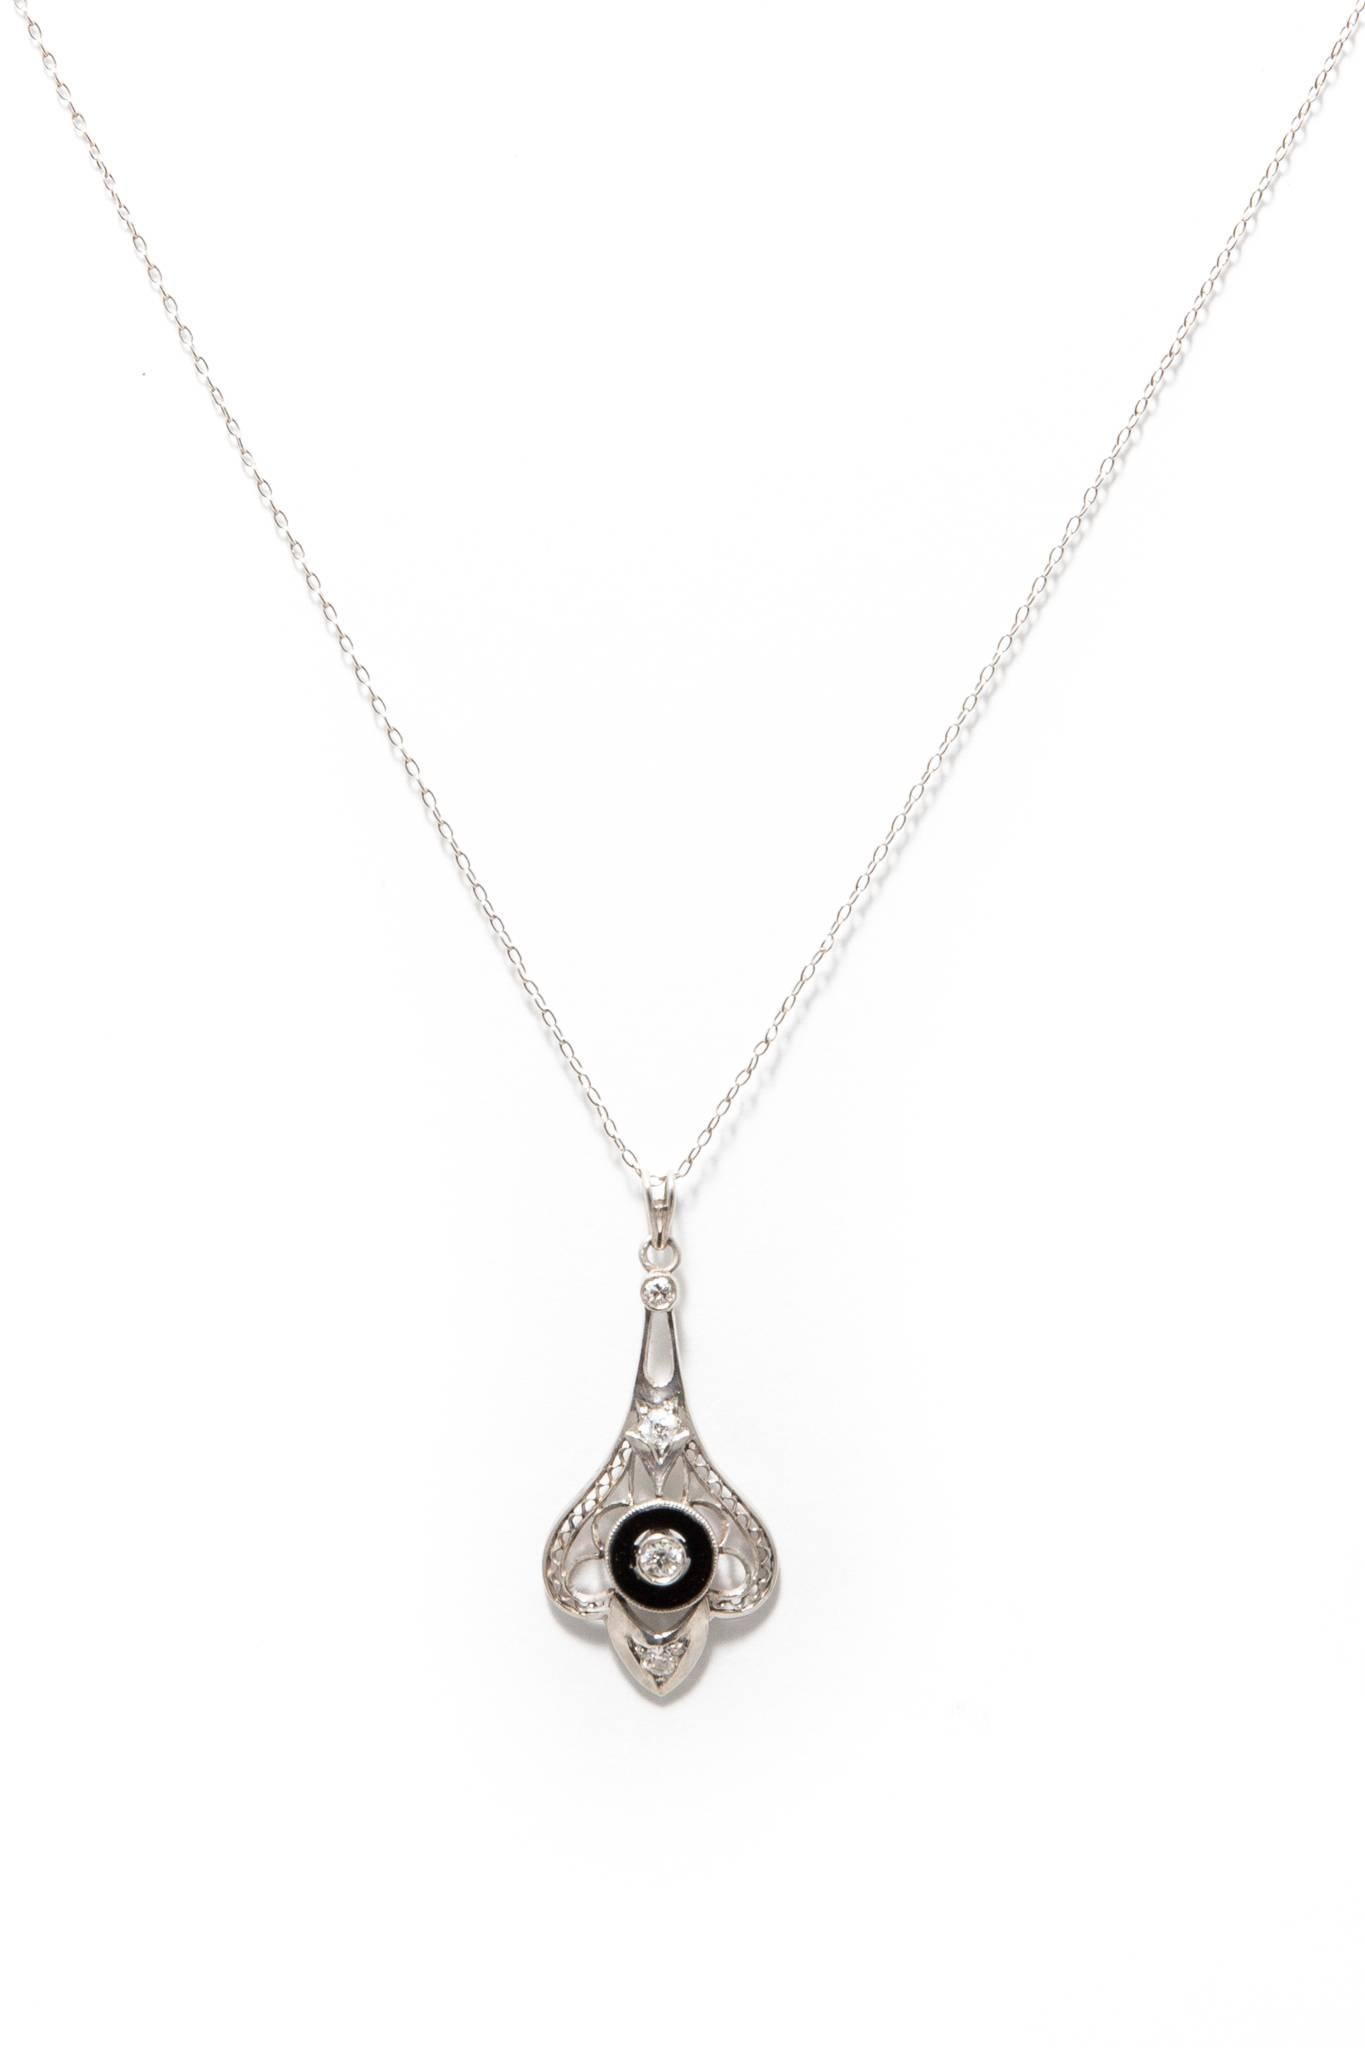 A beautiful original art deco period diamond and onyx pendant necklace in luxurious platinum.  Set with European cut diamonds amidst hand formed wire filigree work, this necklaces features a central jet black onyx disk set with a sparkling